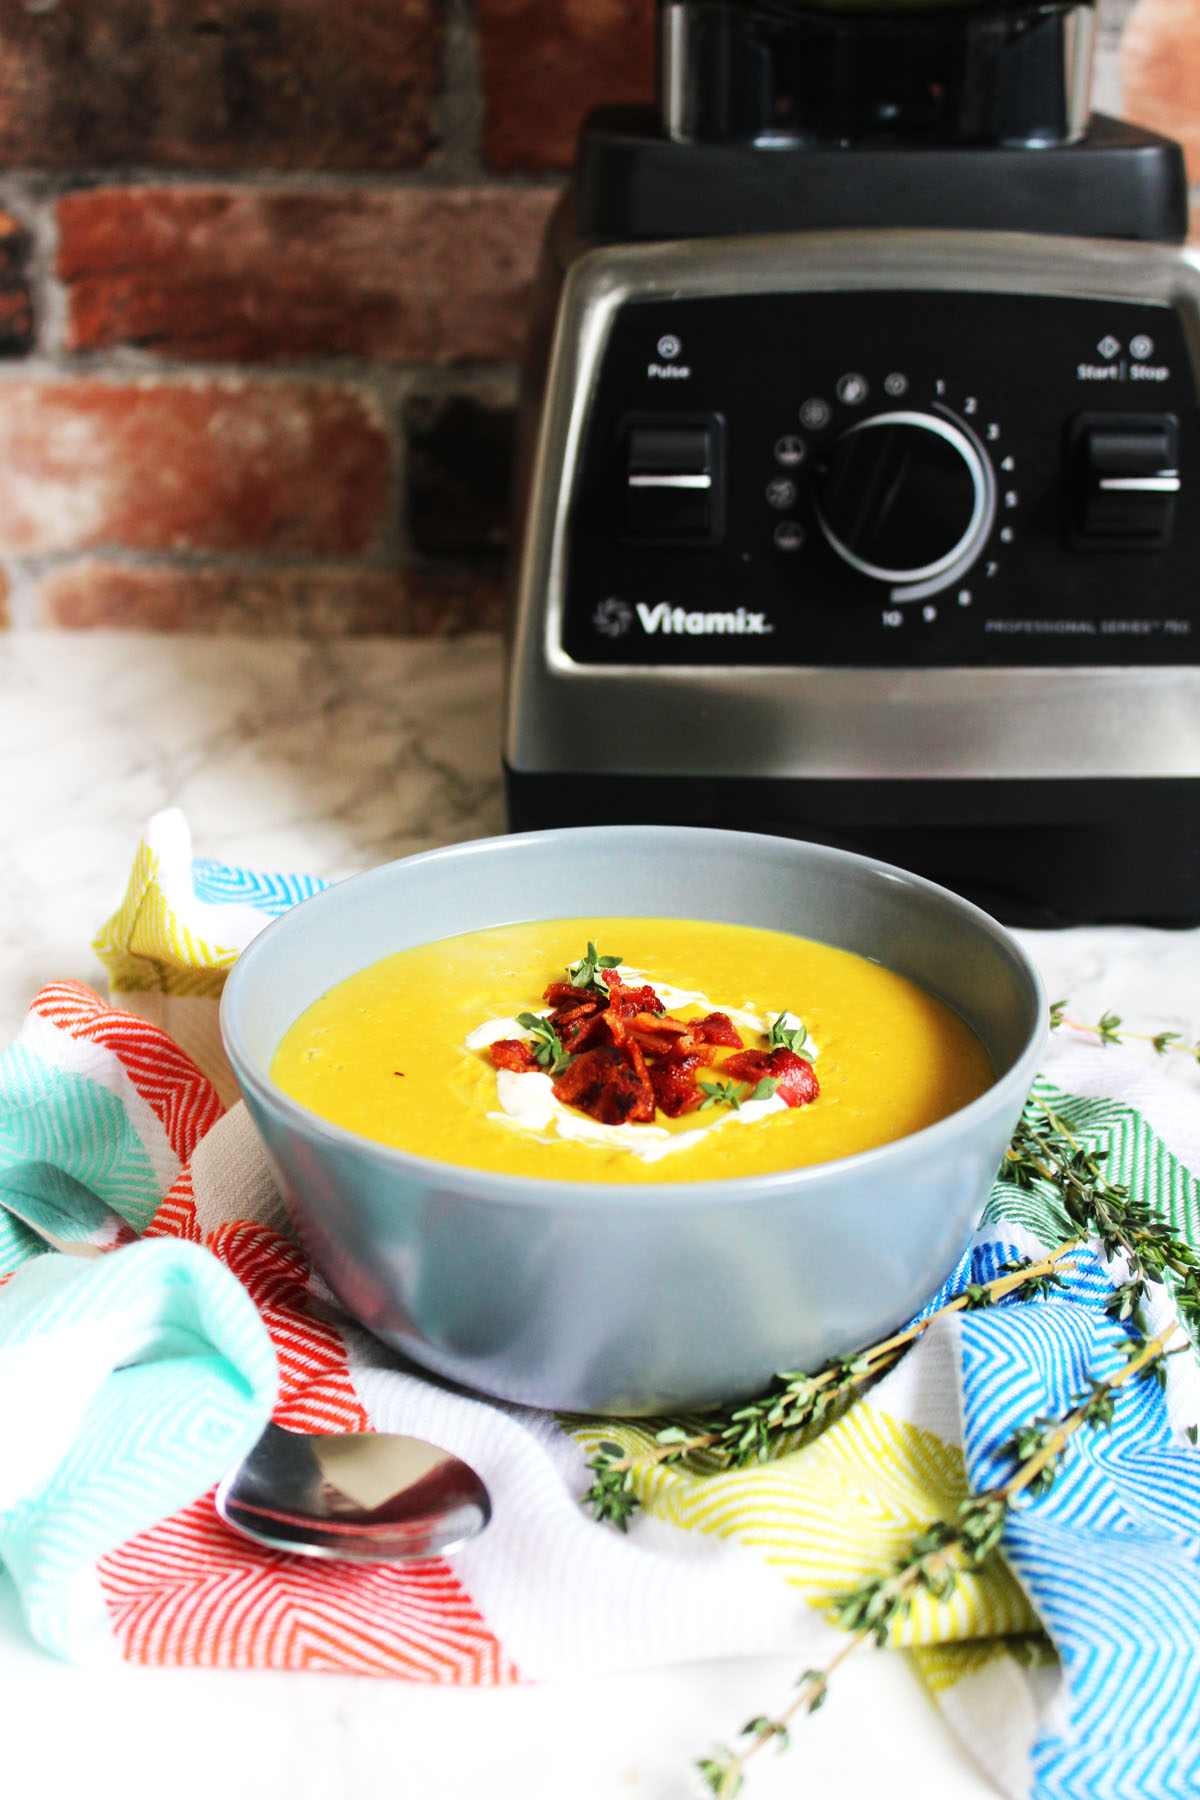 Chestnut and Parsnip Soup with Crispy Bacon bits. A tasty seasonal soup that can be made from scratch in a Vitamix blender! Why not make it for Christmas or Thanksgiving dinner this year? Get the recipe on Supper in the Suburbs